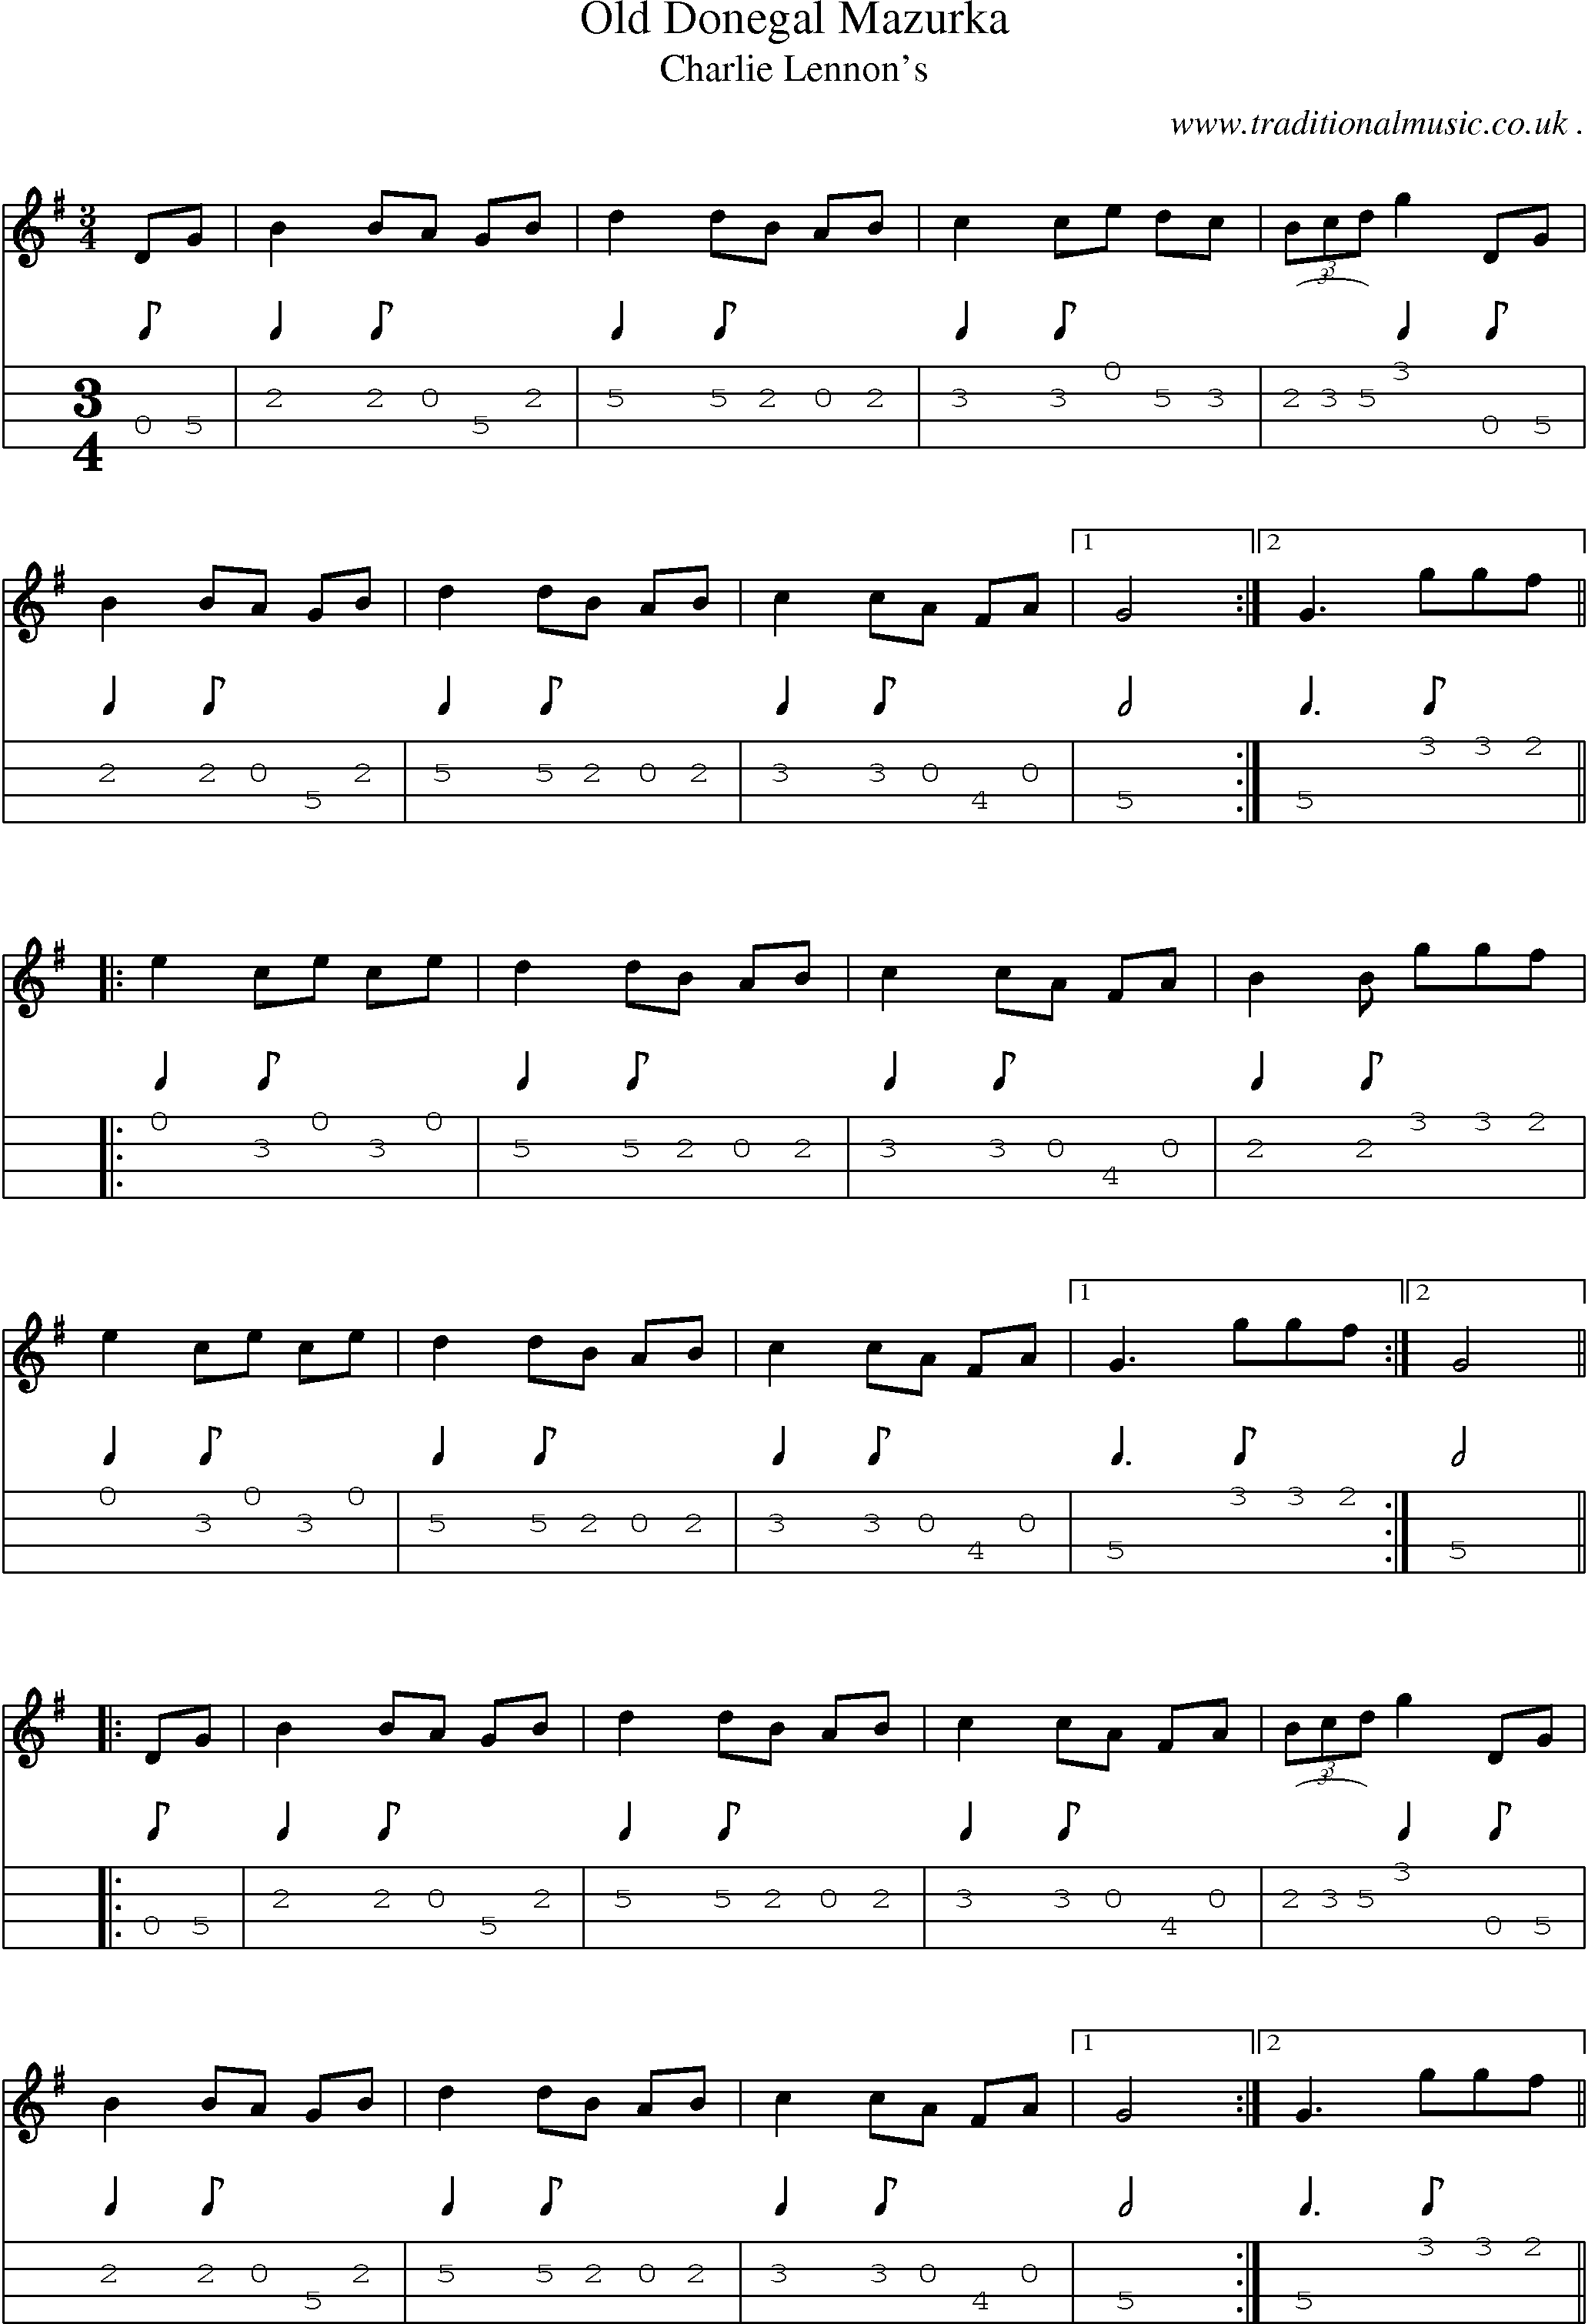 Sheet-Music and Mandolin Tabs for Old Donegal Mazurka